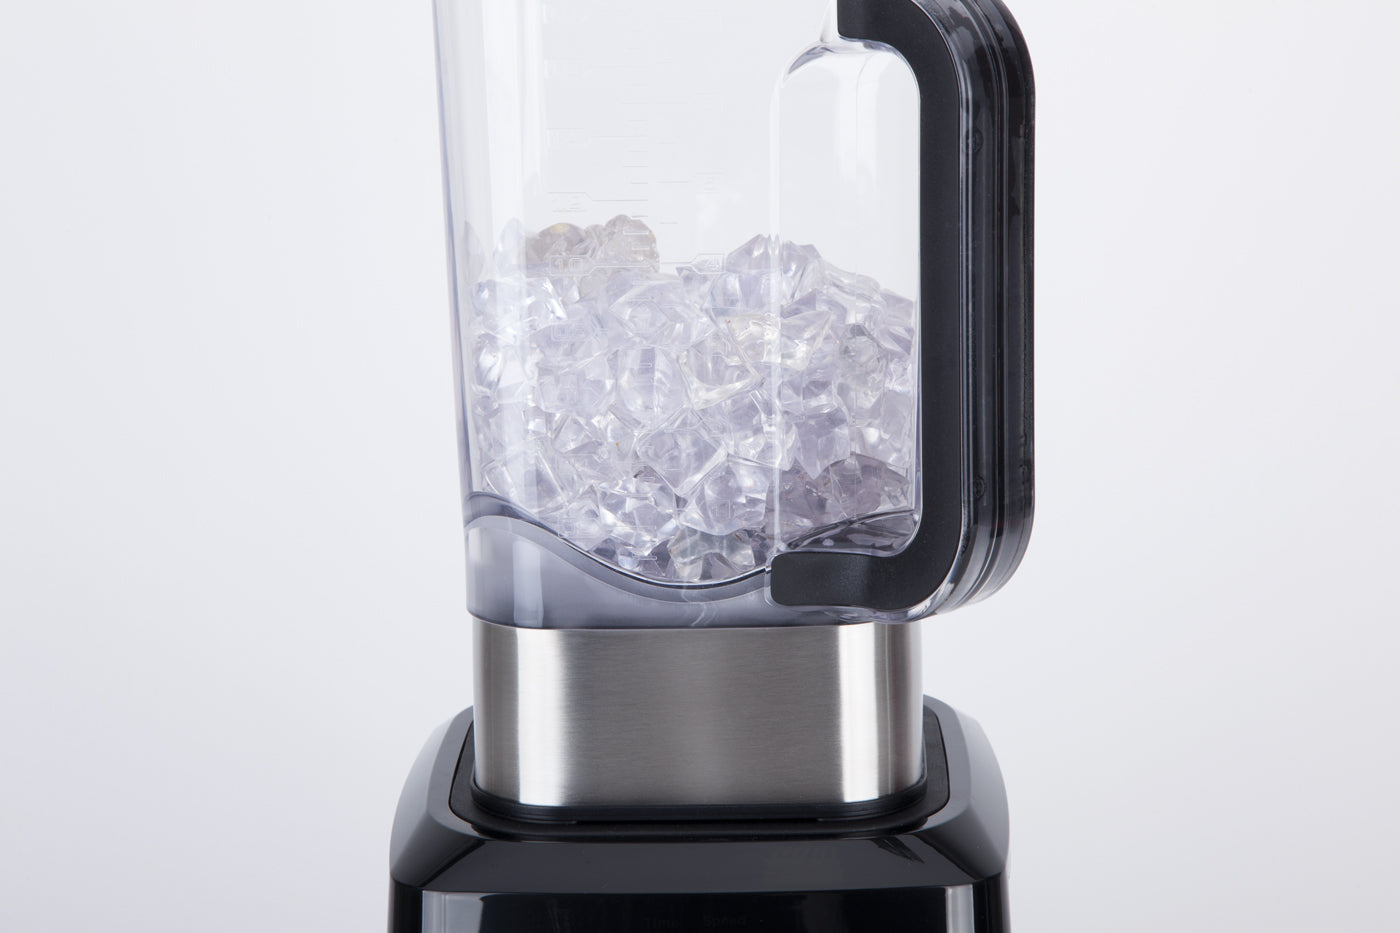 Blender with 1600W power and Tritan Cup, Jata BT1050